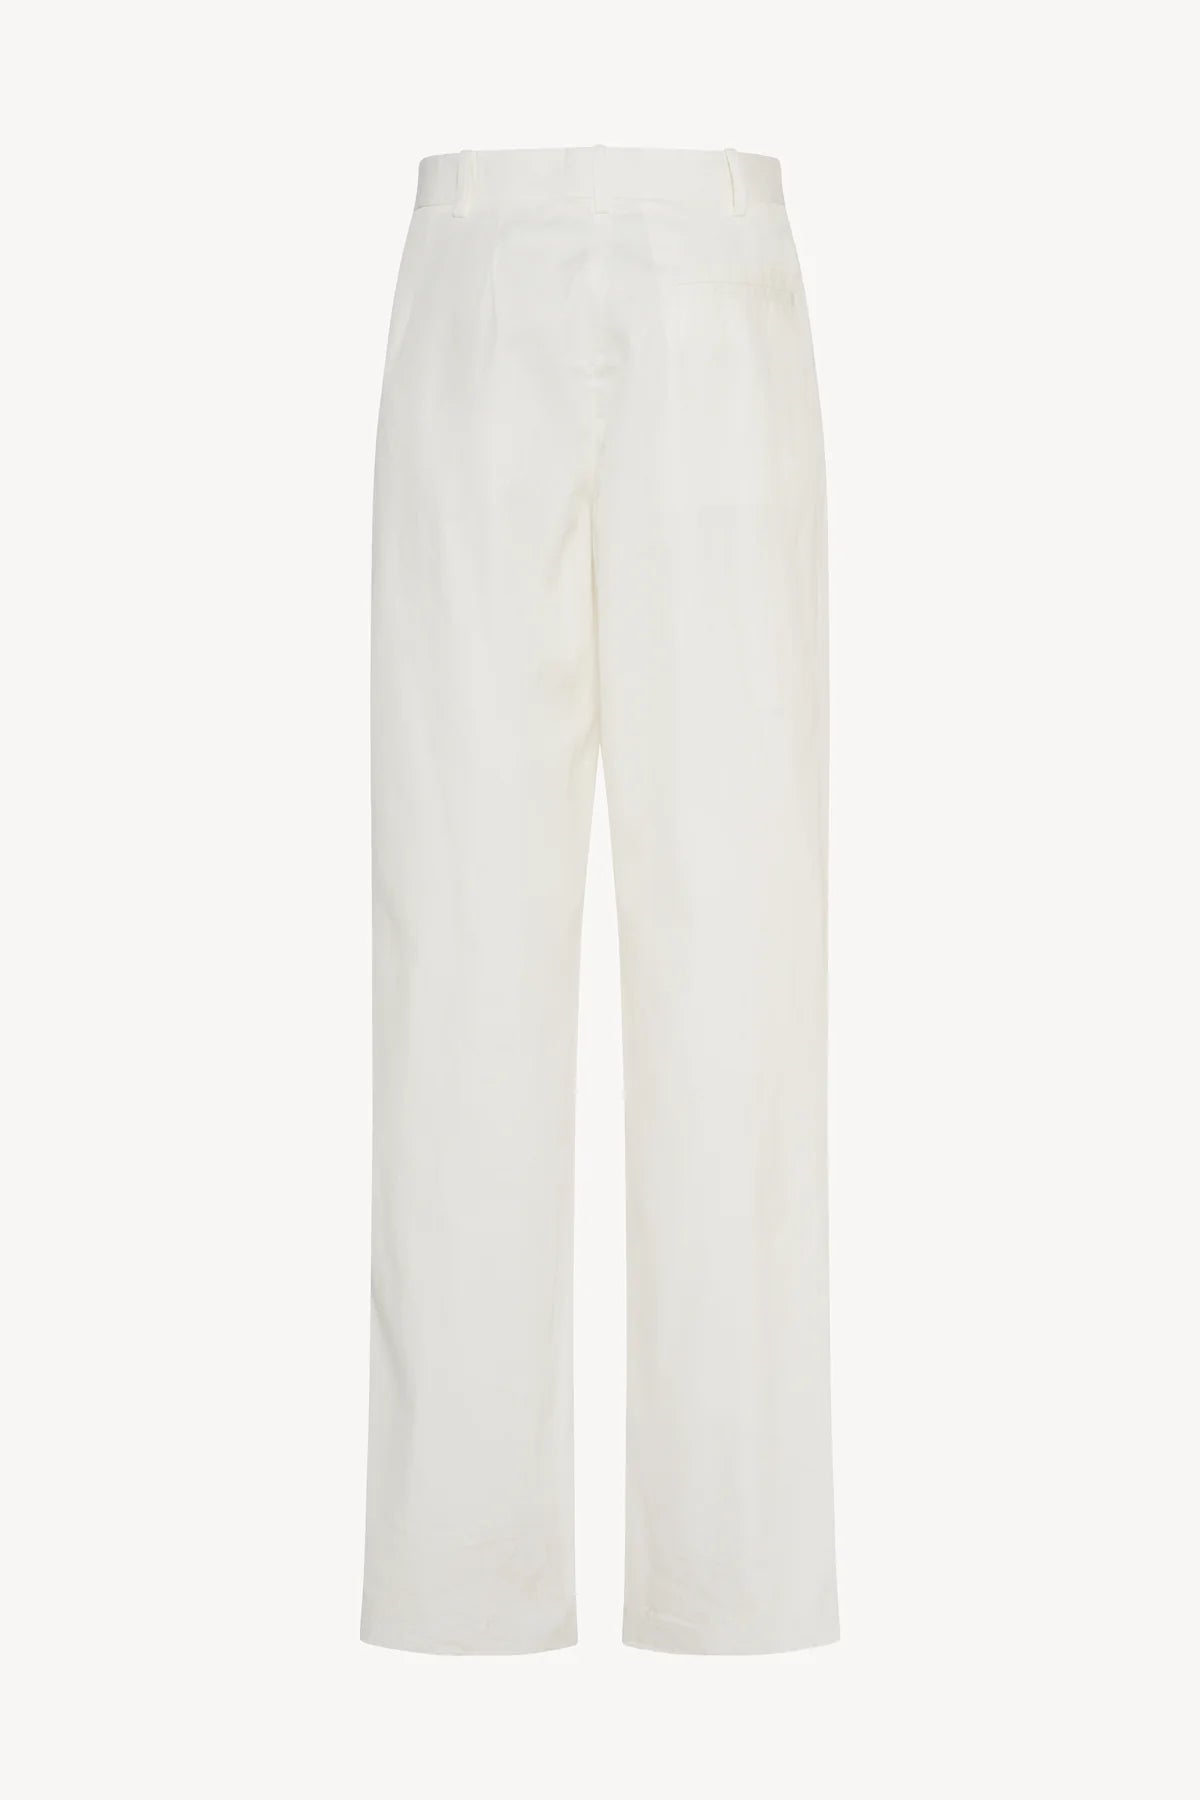 BUFUS TROUSERS